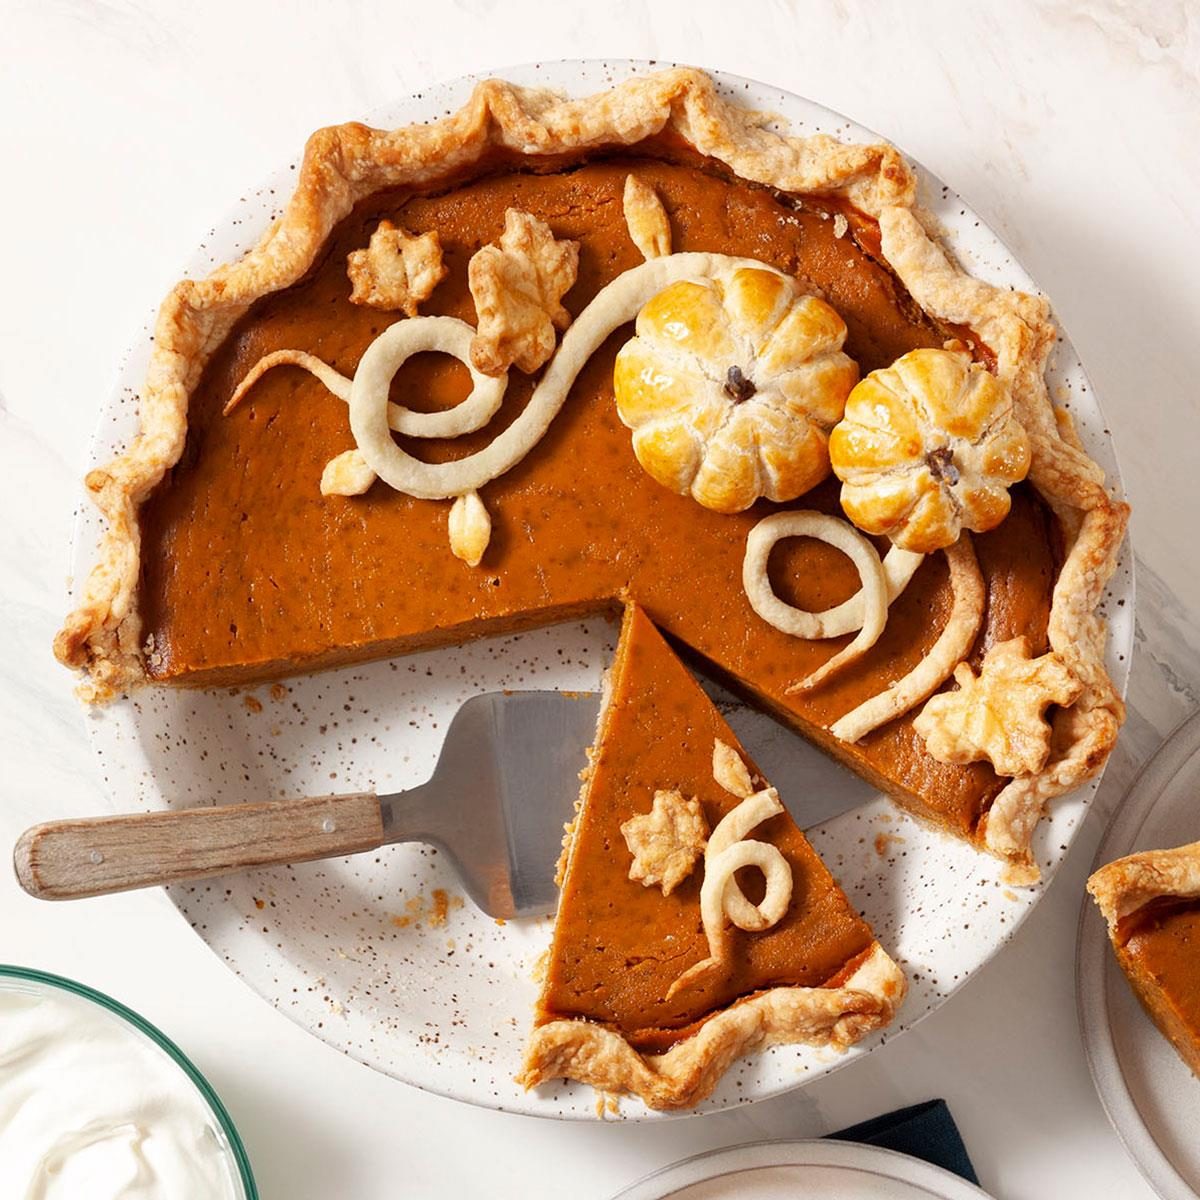 Traditional Pumpkin Pie Recipe: How to Make It